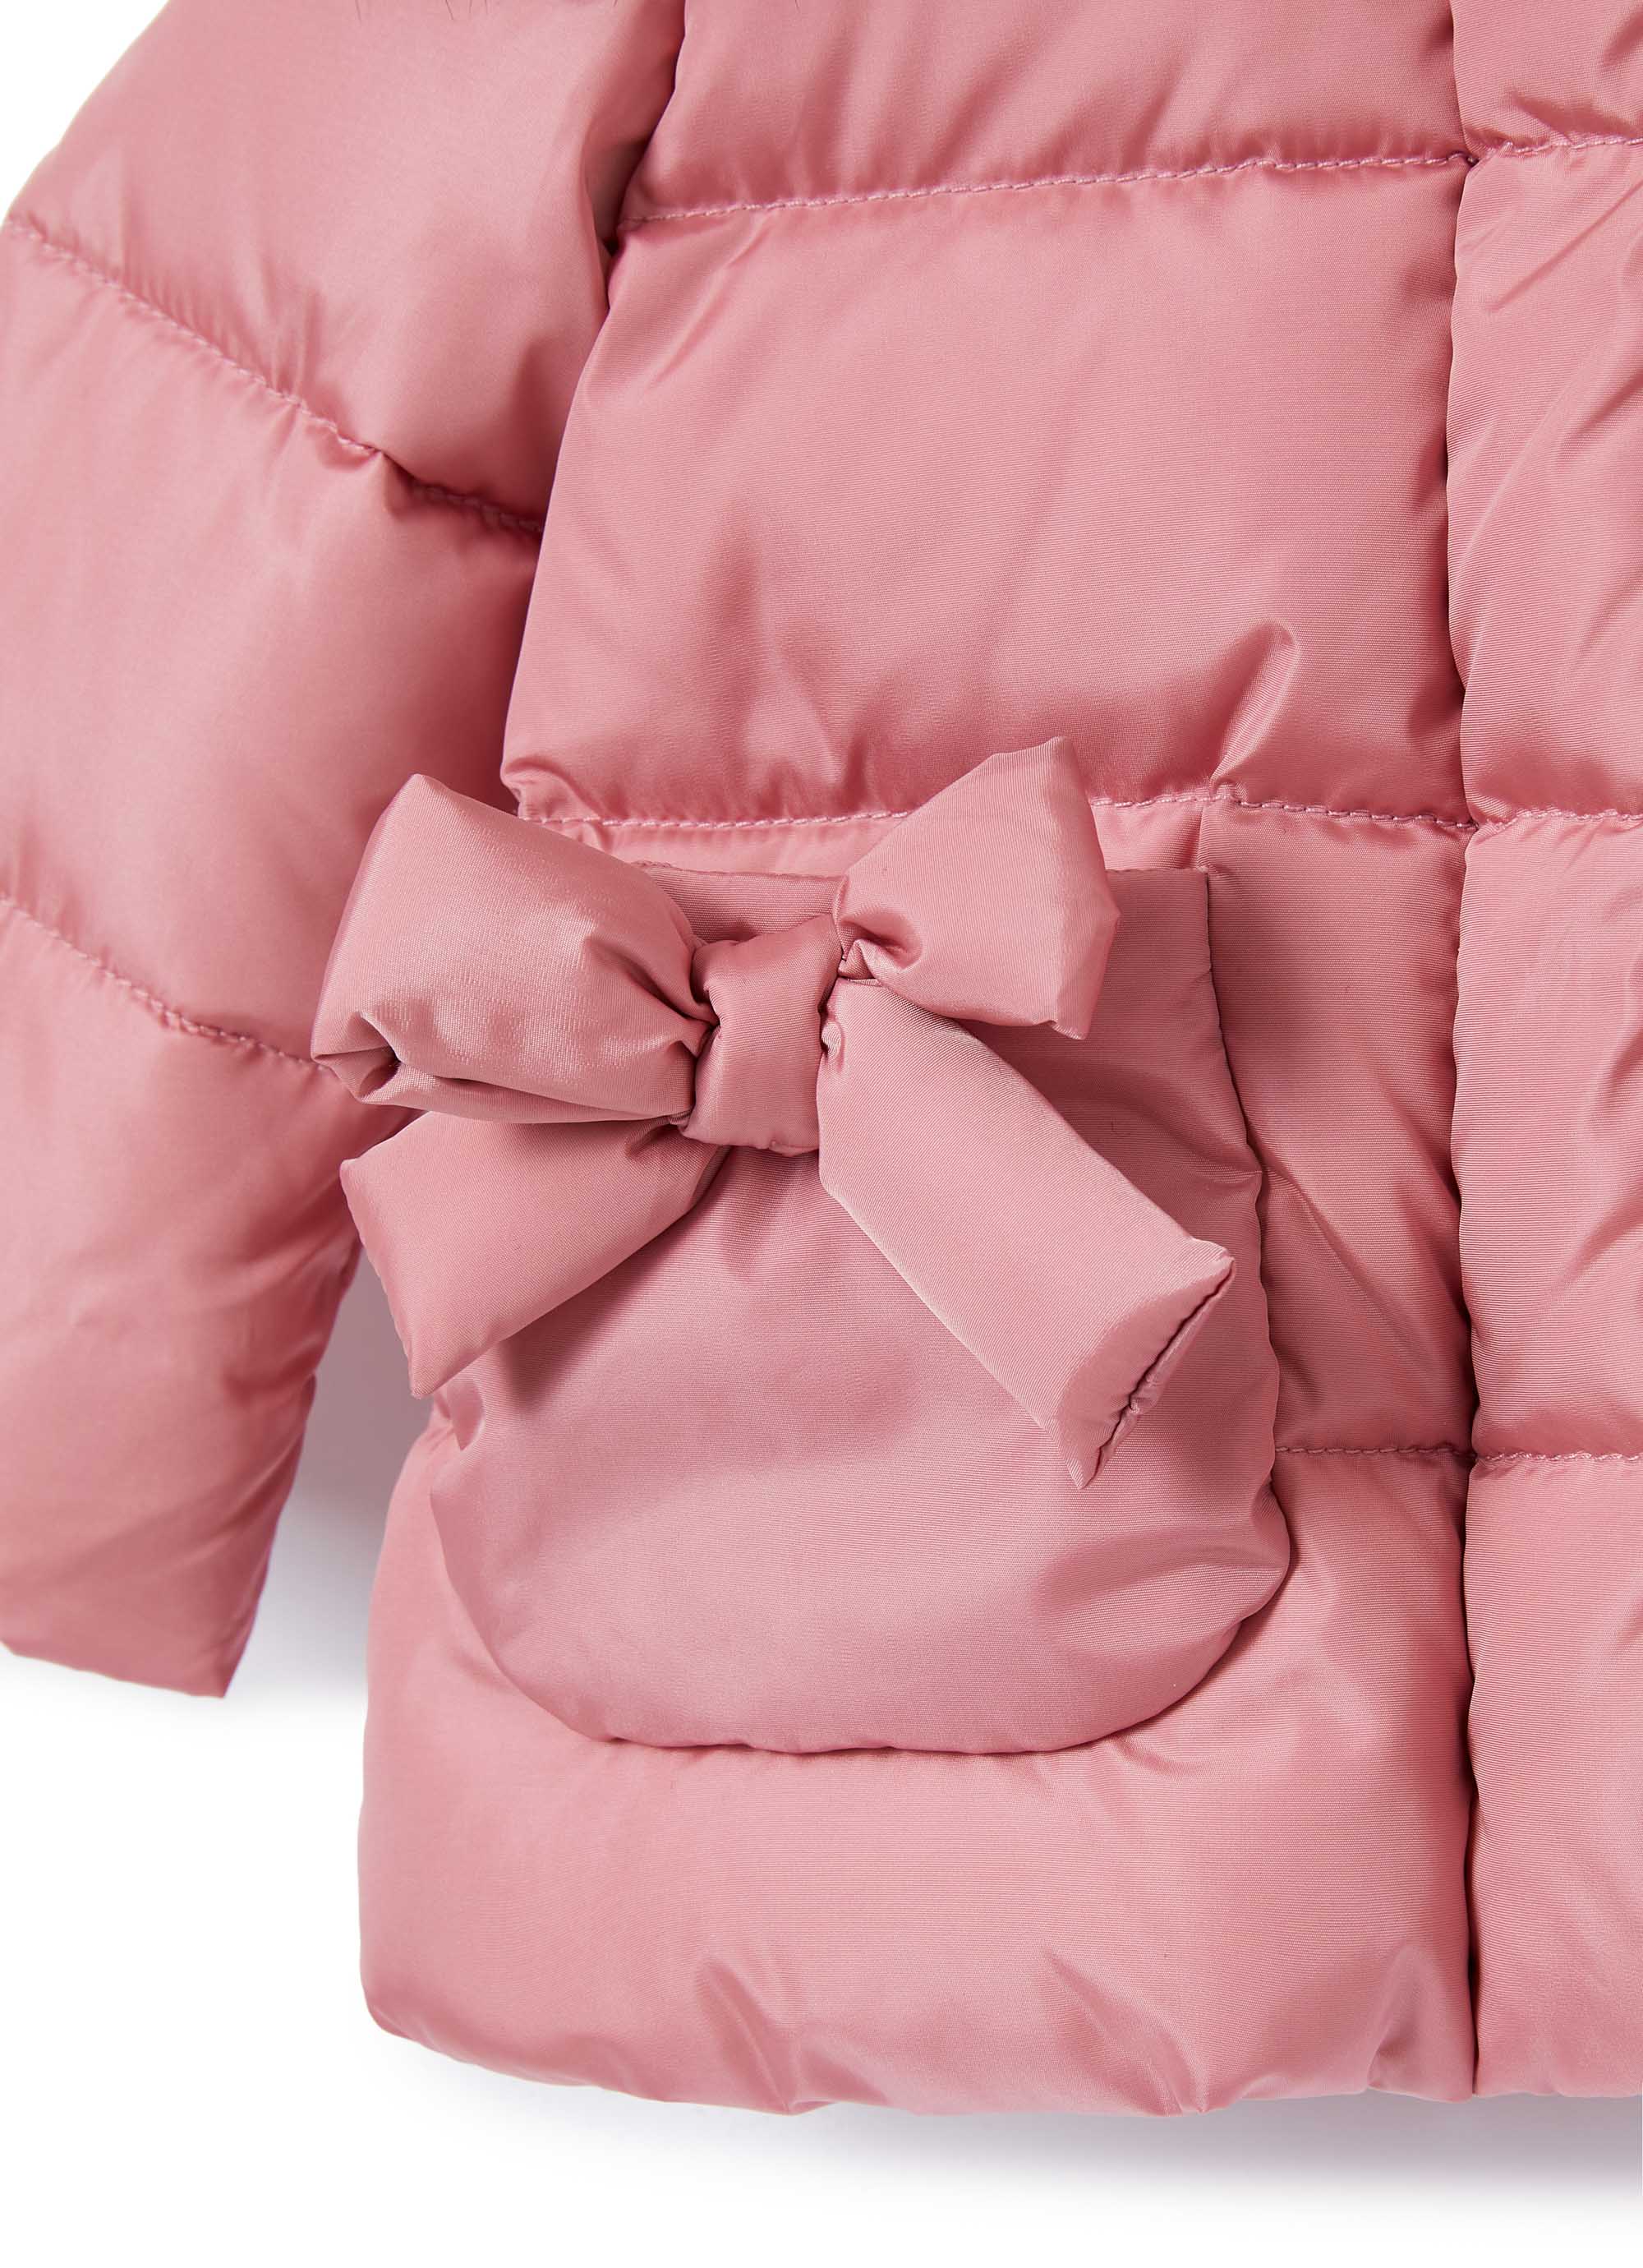 Baby Girls Cameo Rose Padded Down Jacket